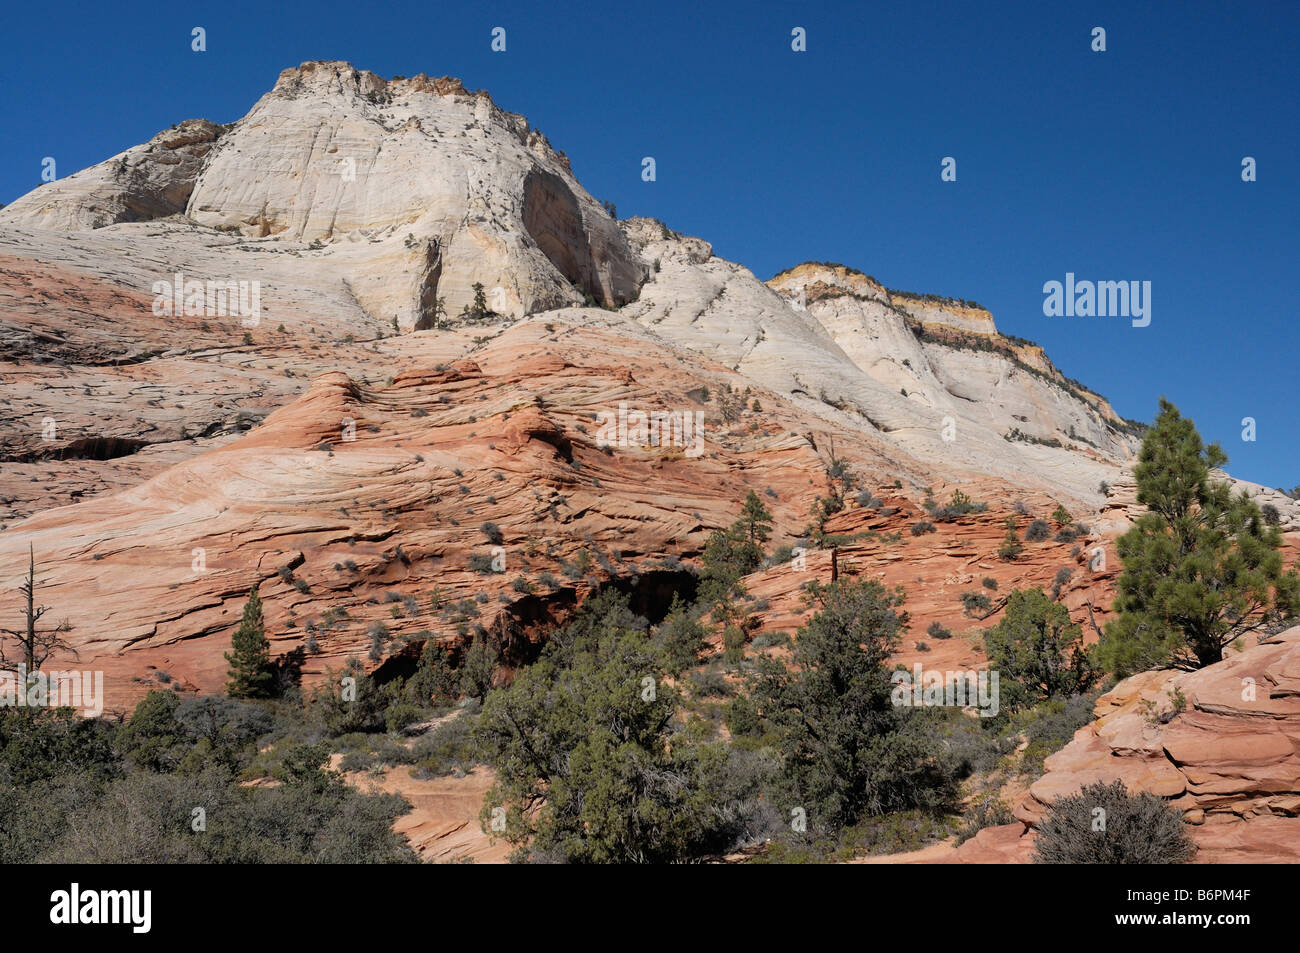 Typical layered Navajo and Kayenta sandstone formation with pine trees along Highway 9 in Zion National Park Utah Stock Photo